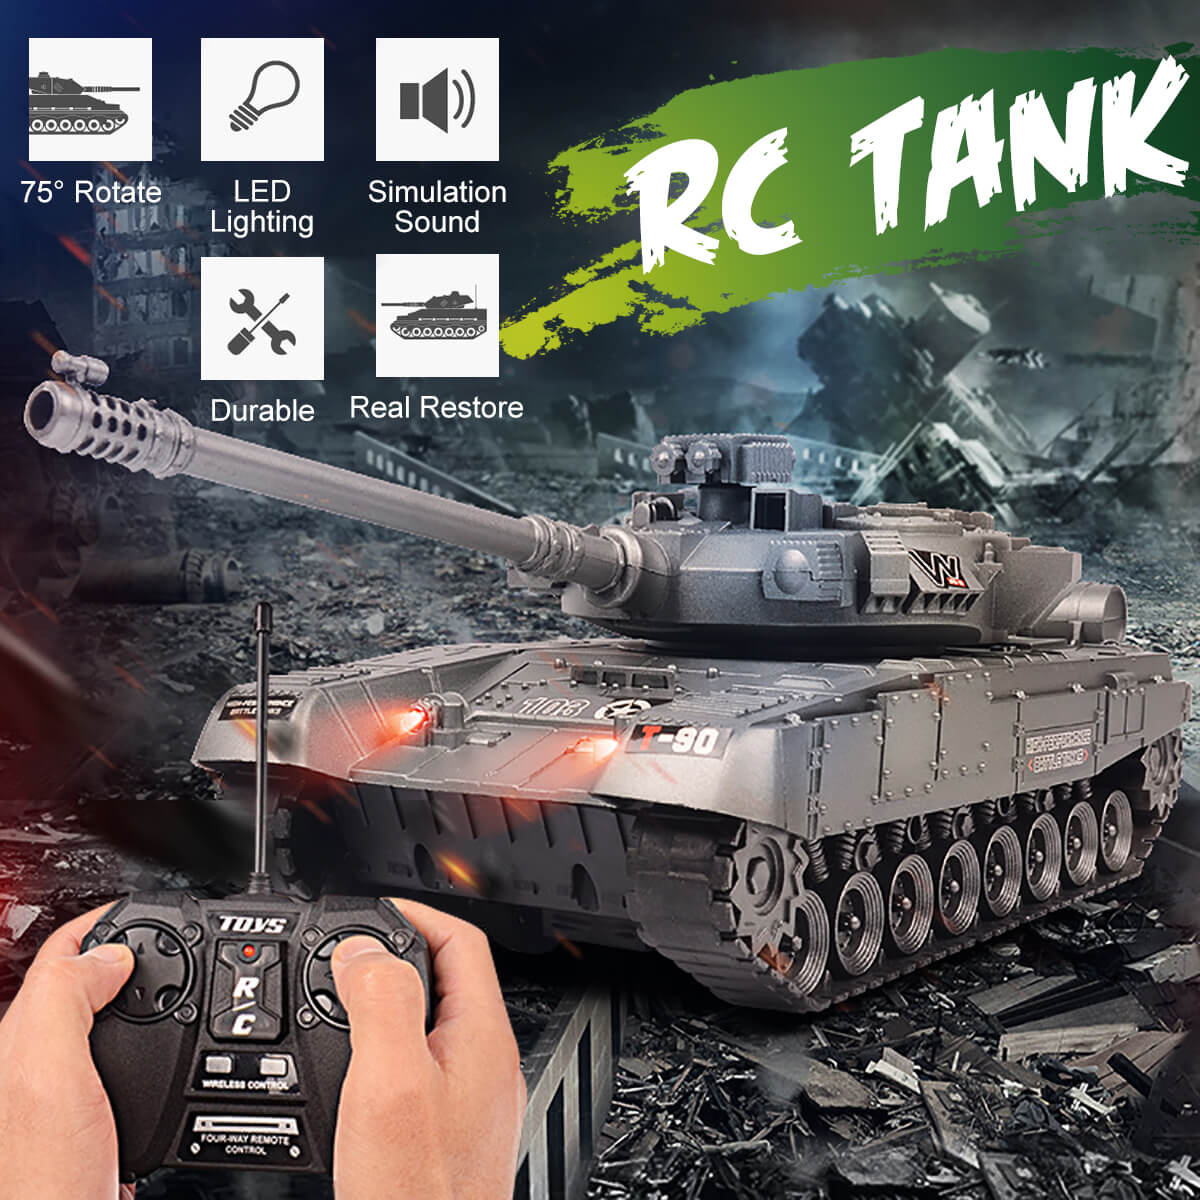 12.3" Remote Control Tank RC Vehicle Full-Function Stunt Tank Toy for Kids Gift